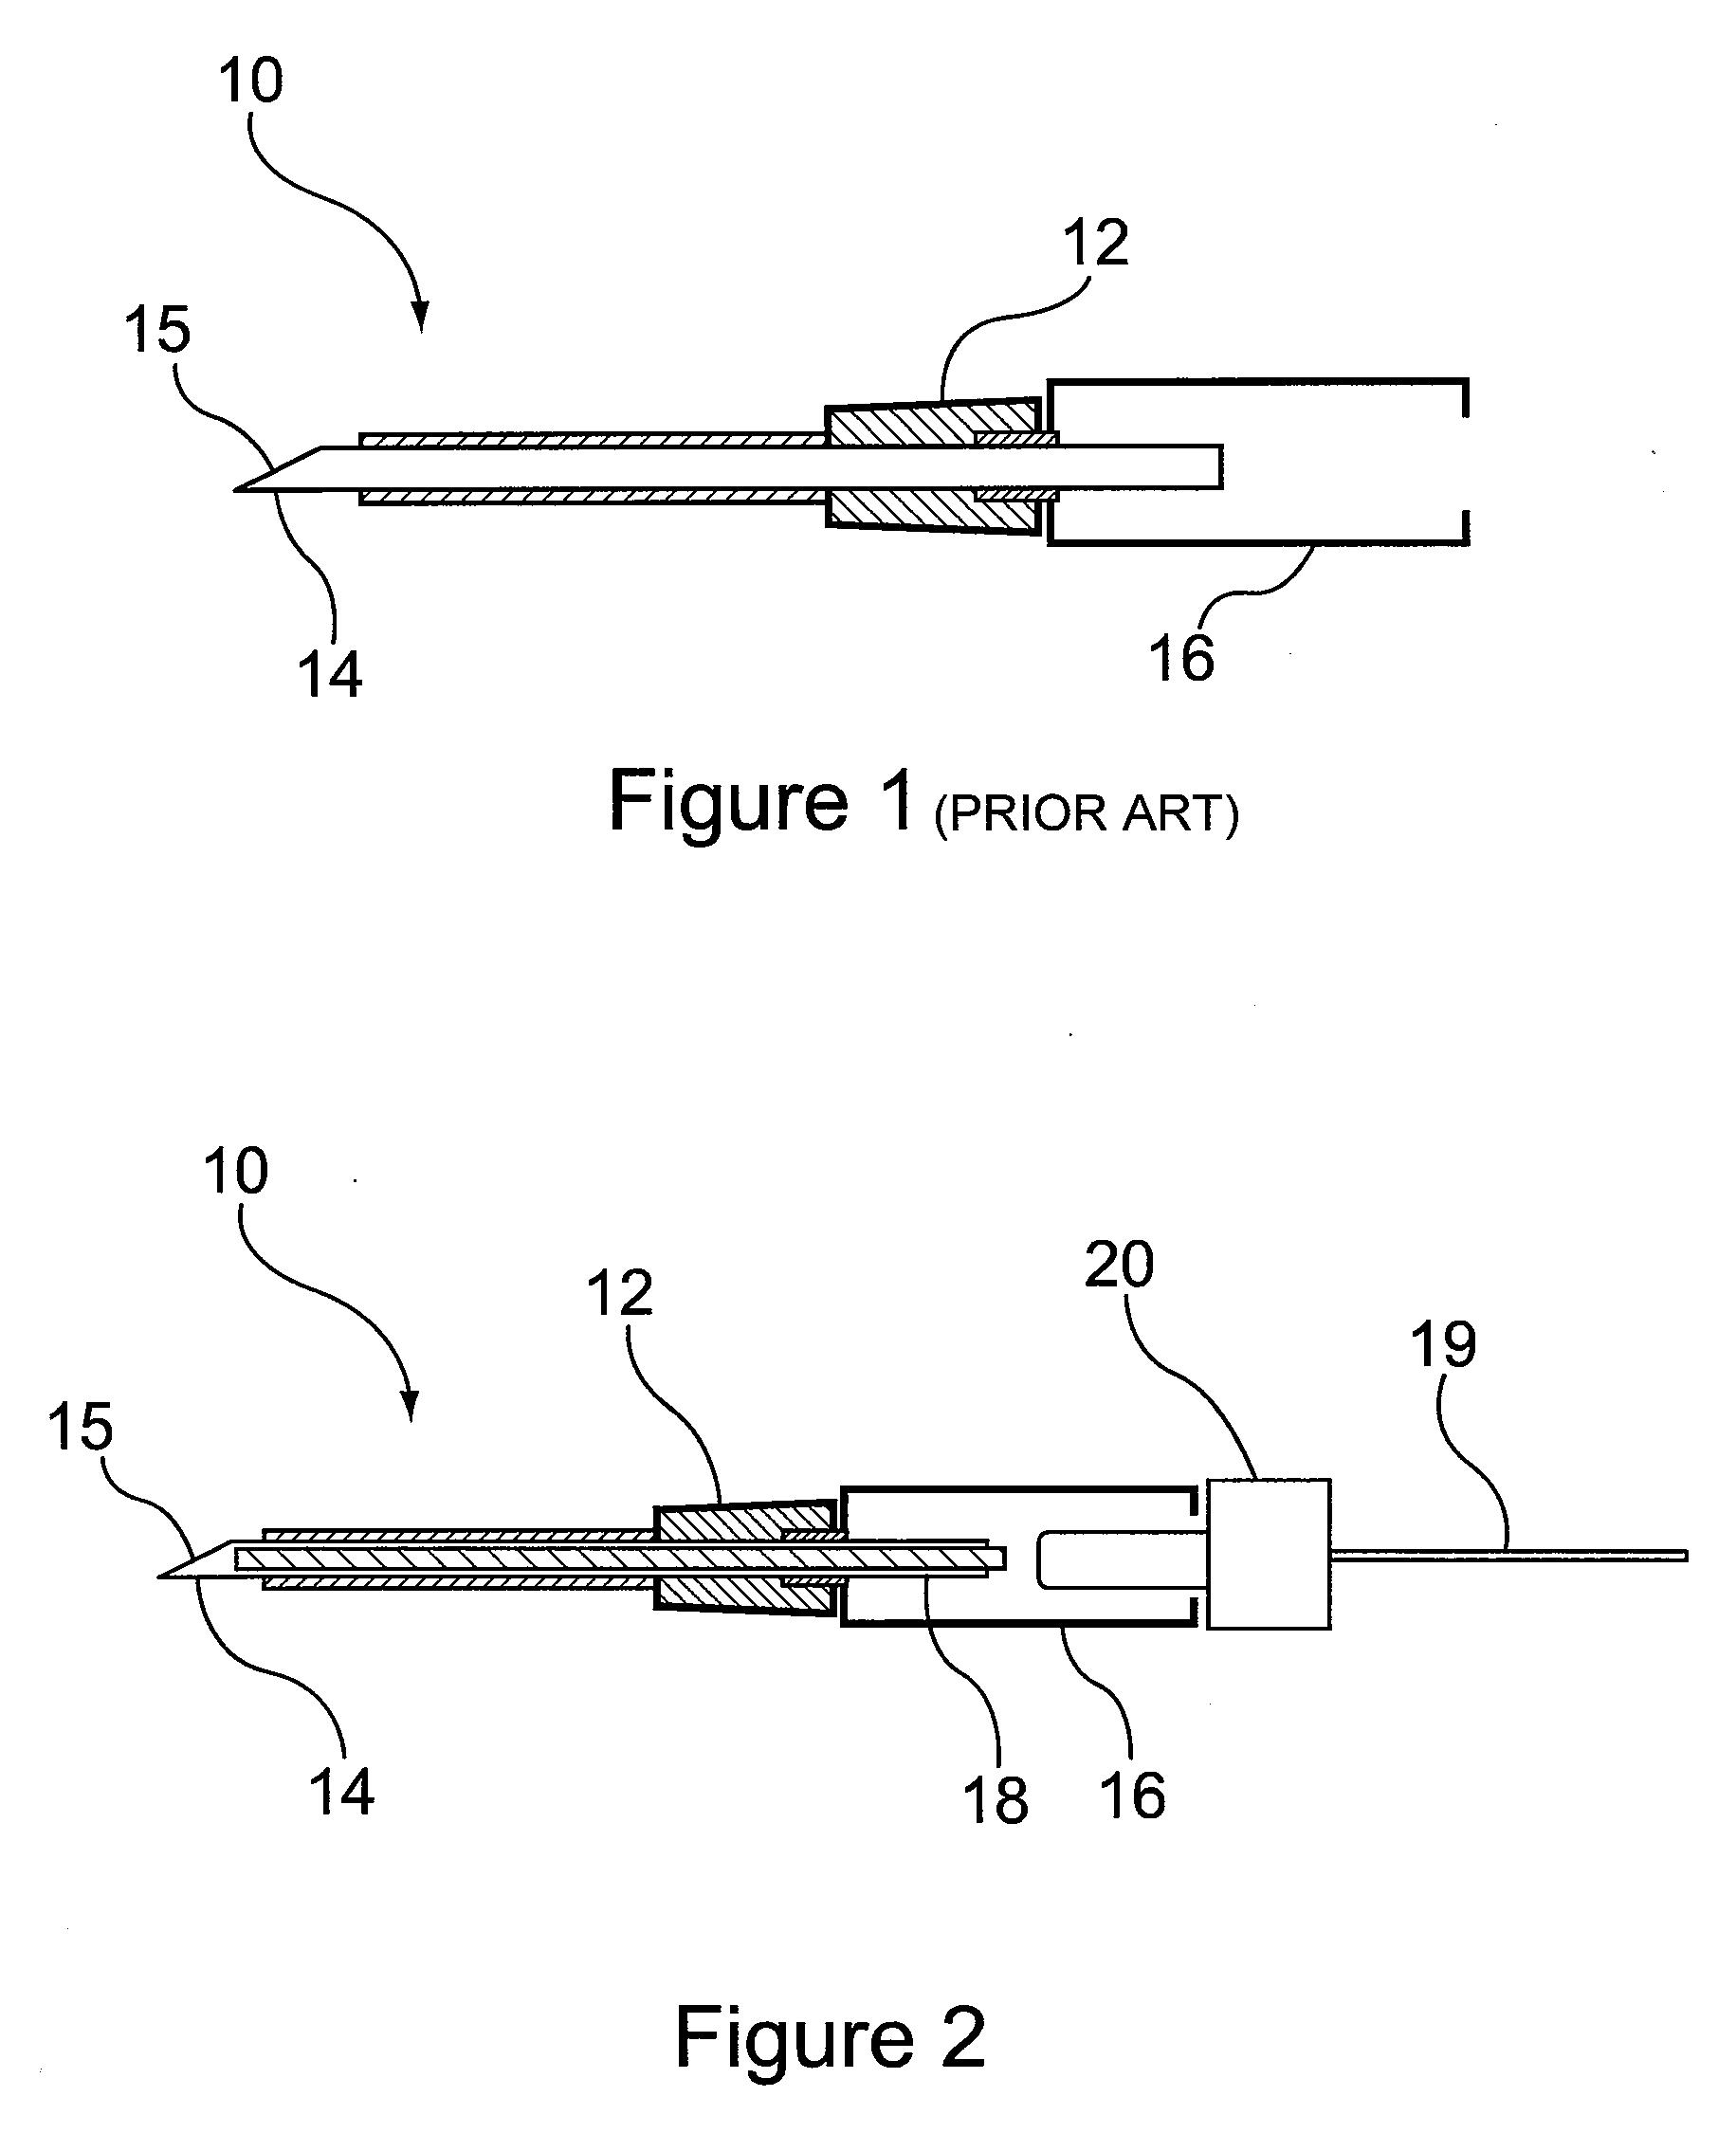 Method and apparatus for detection of catheter location for intravenous access